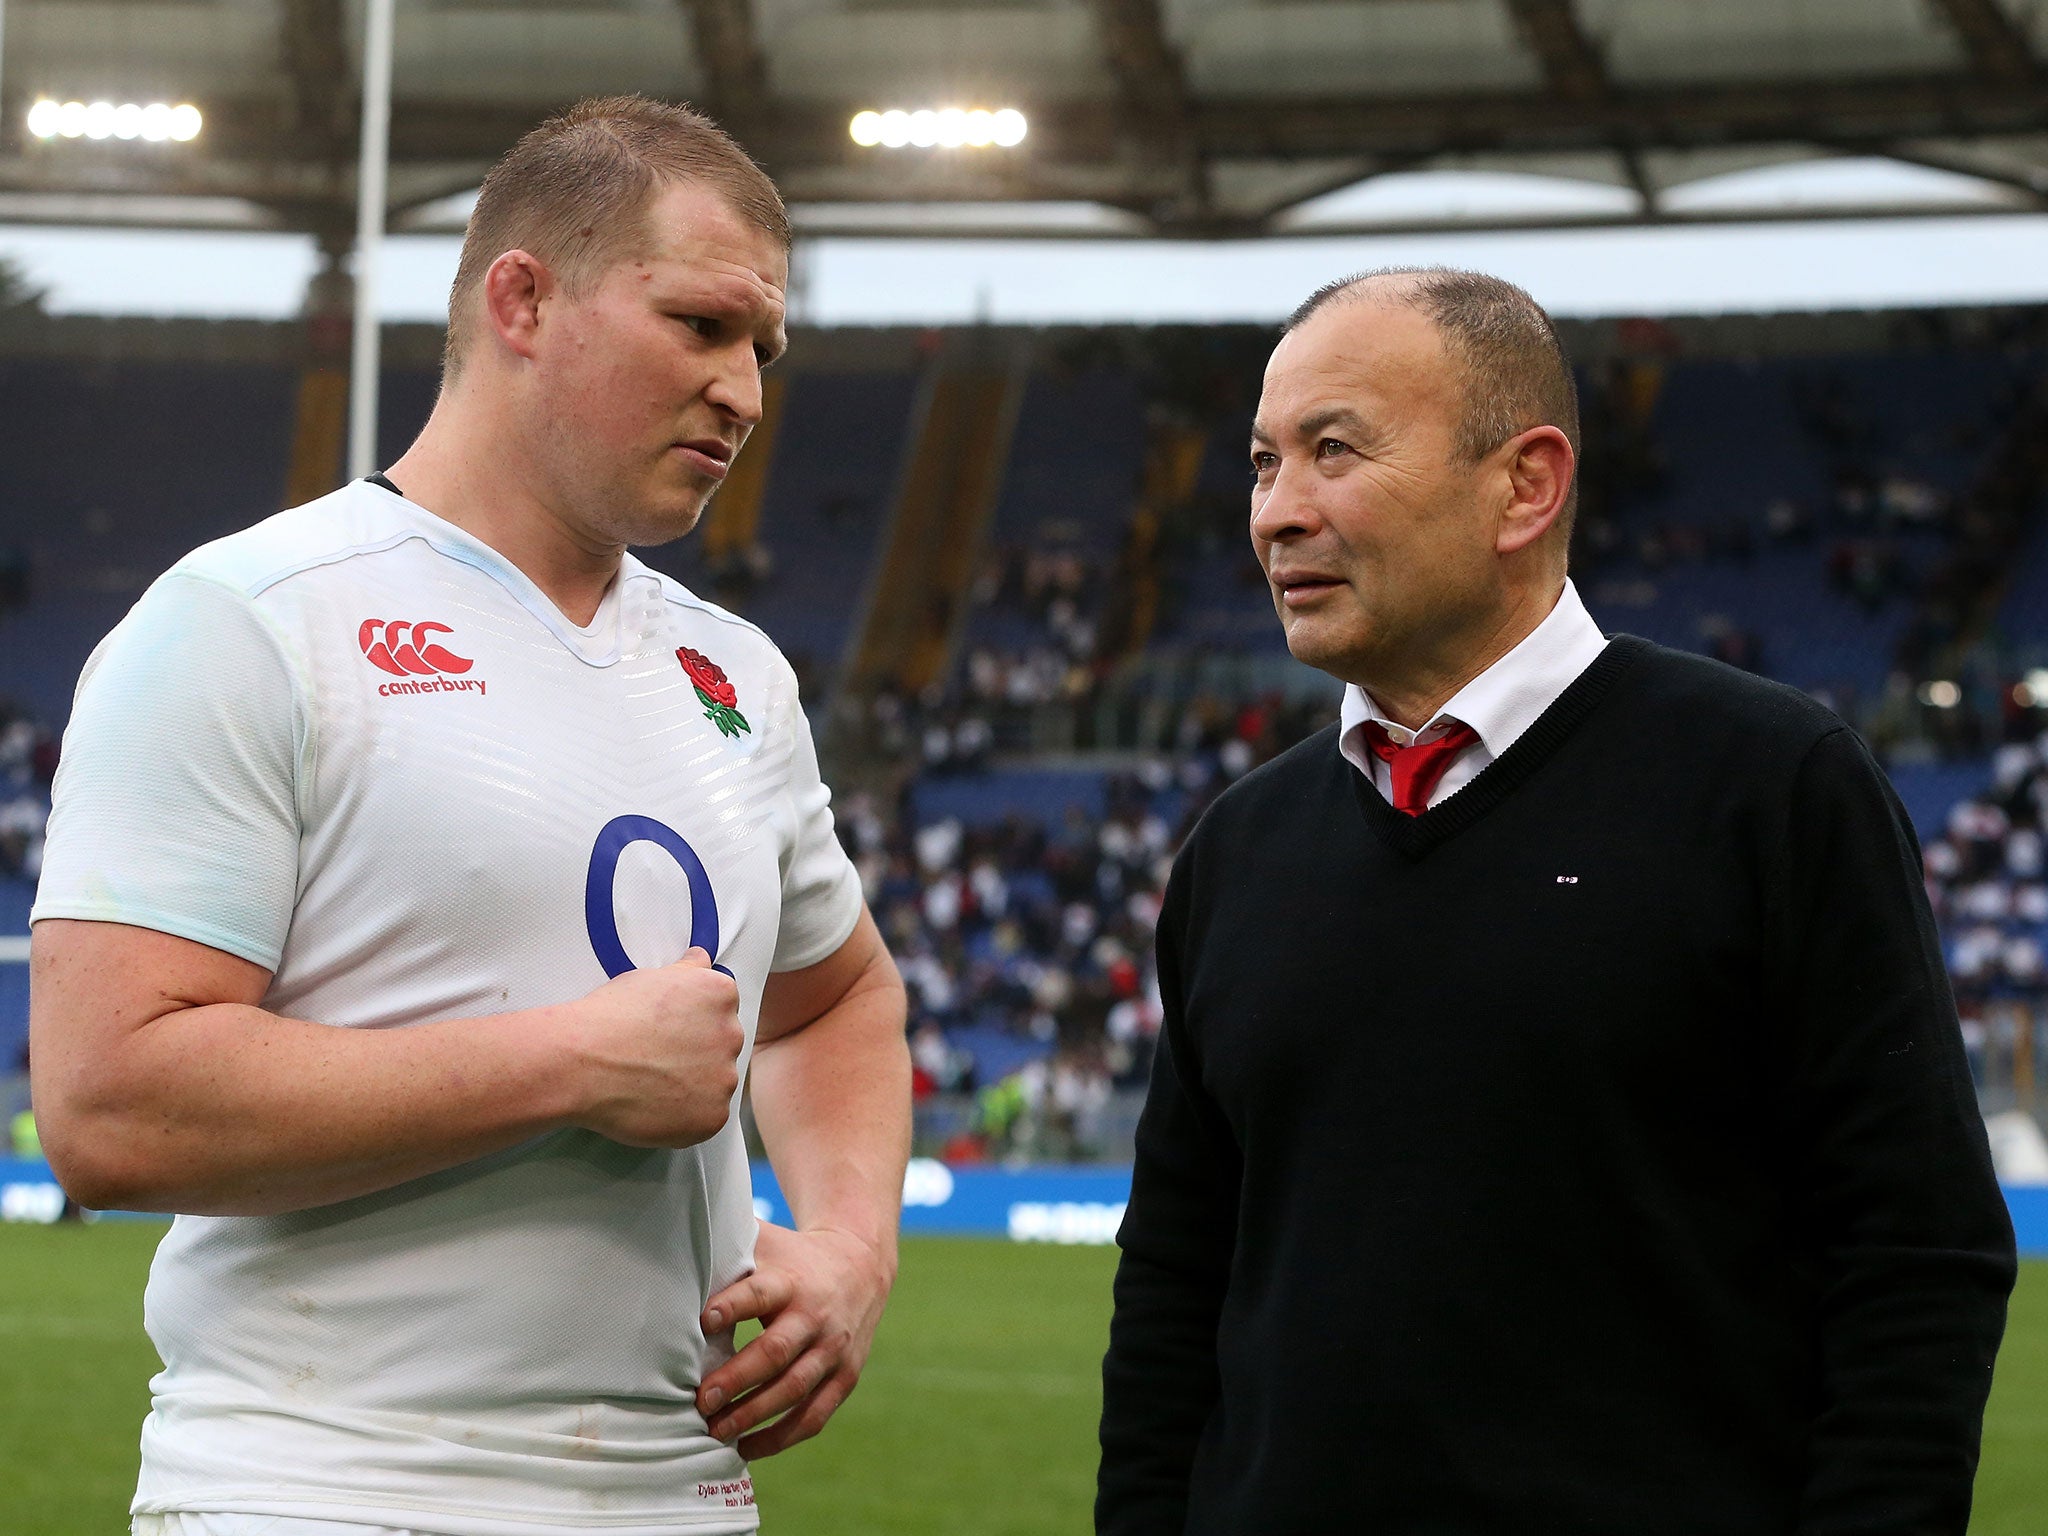 Dylan Hartley talks with Eddie jones after England's win over Italy